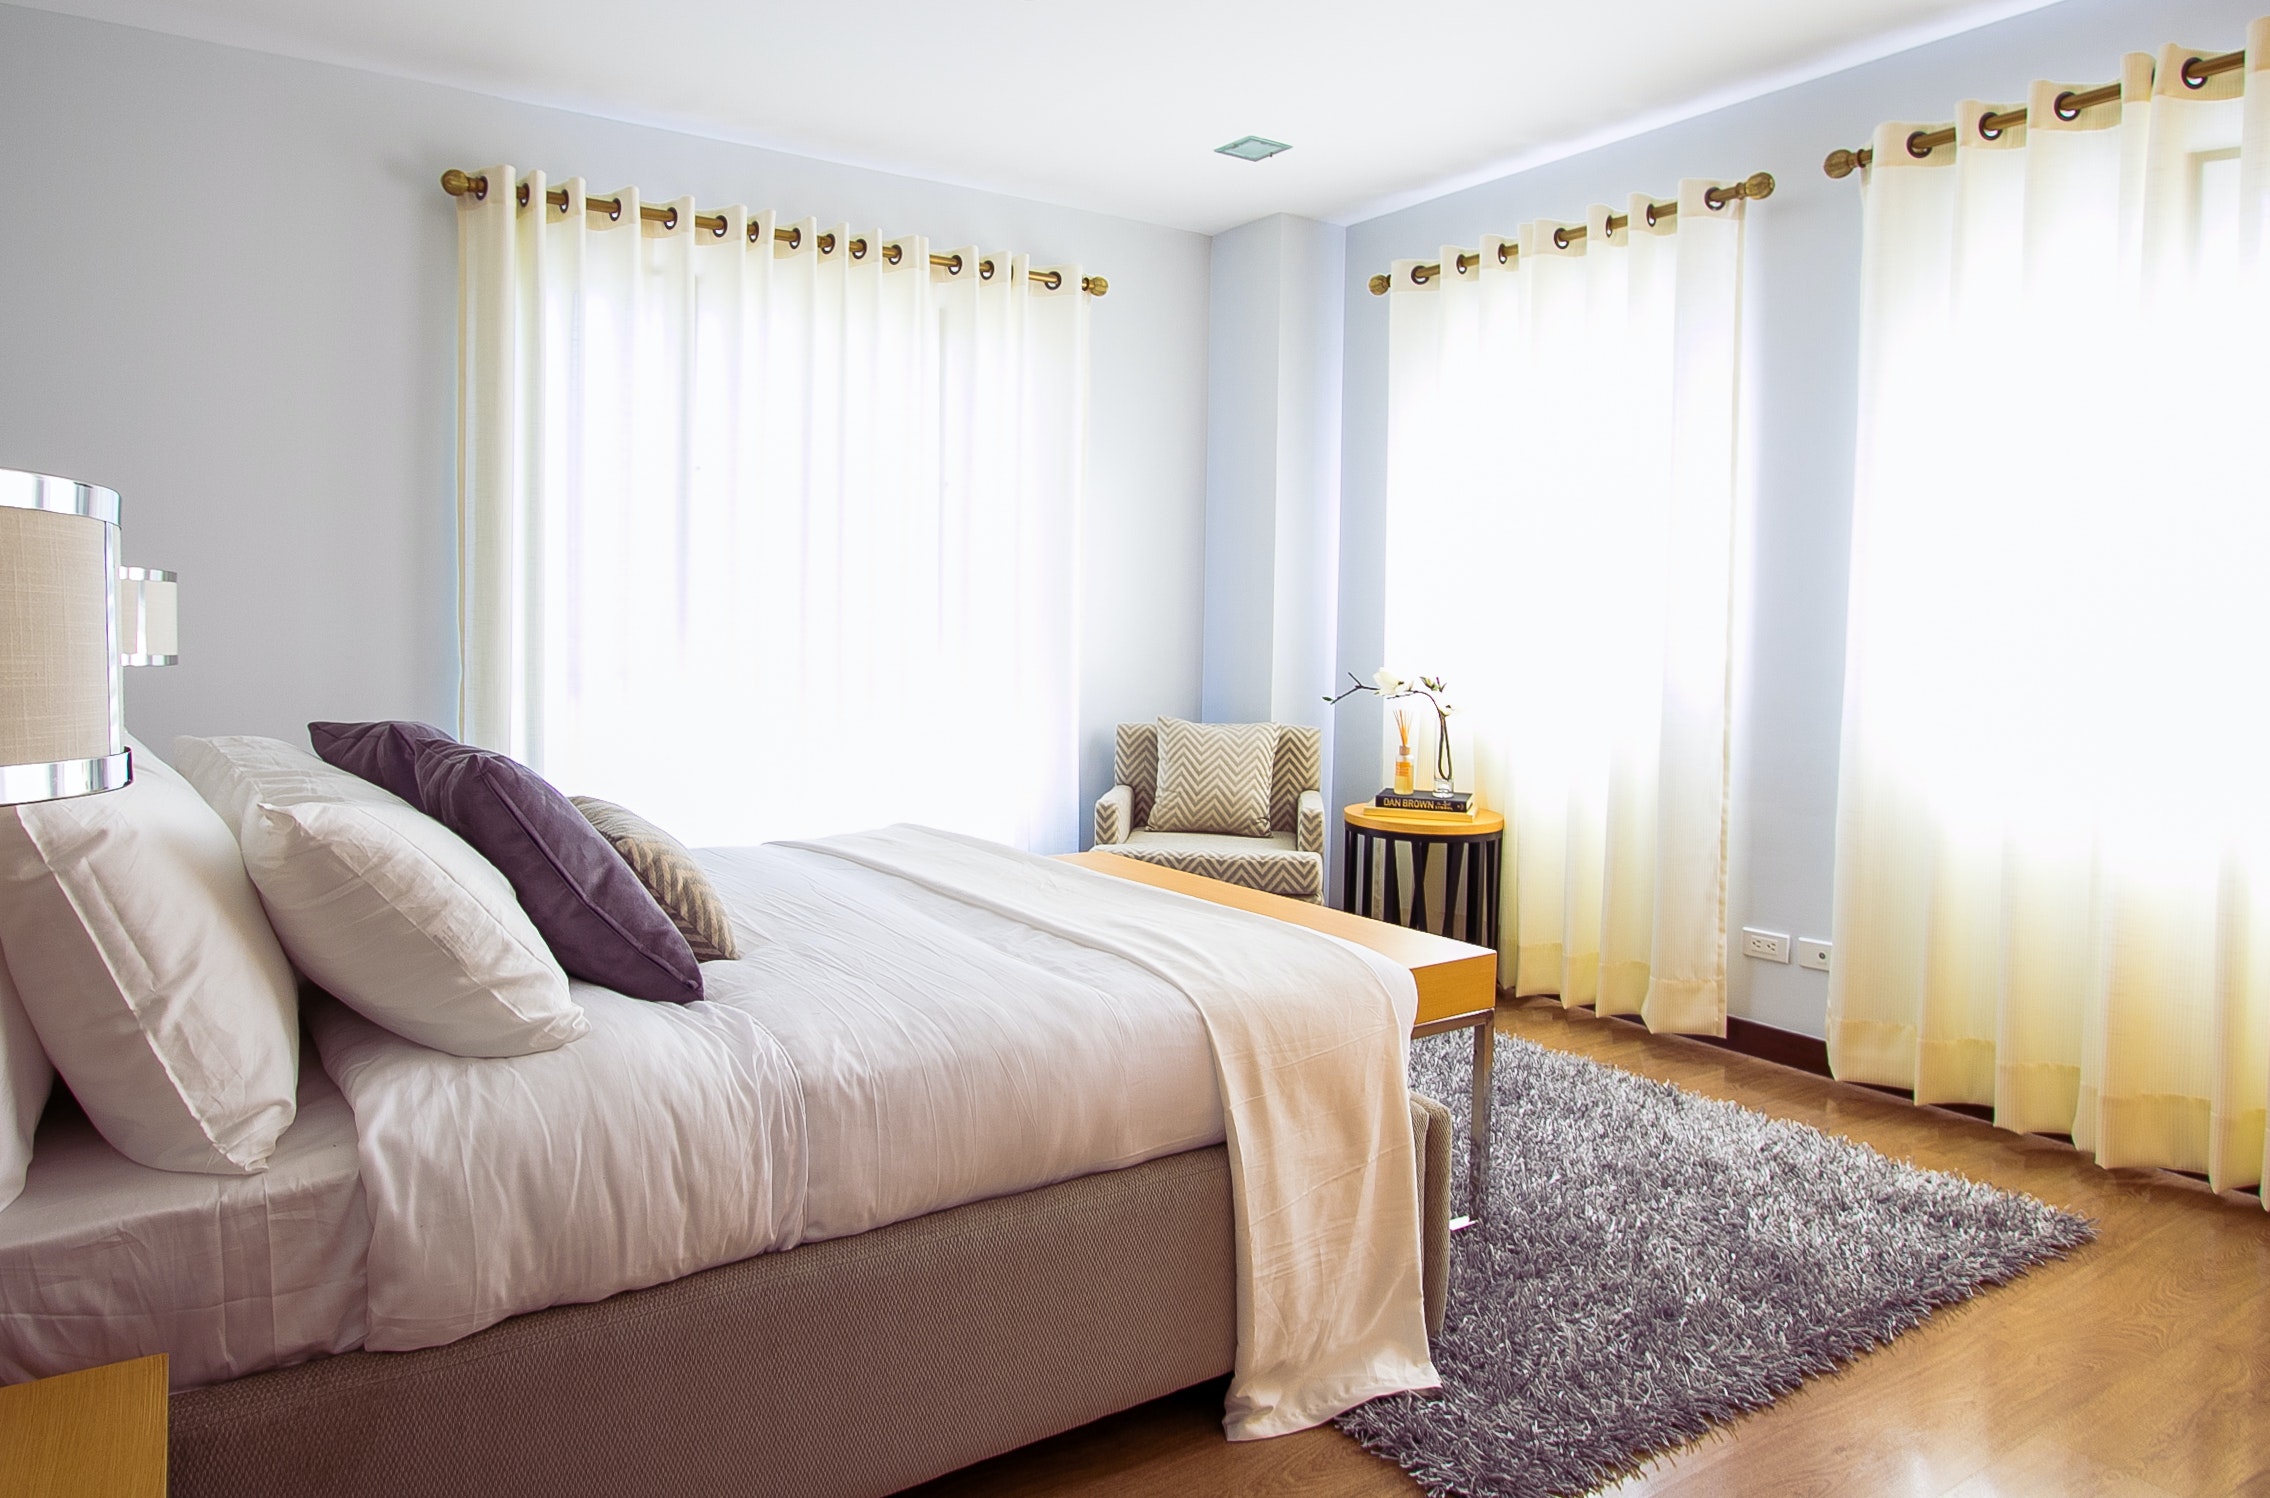 10 Tips for Renting a Room in Your House